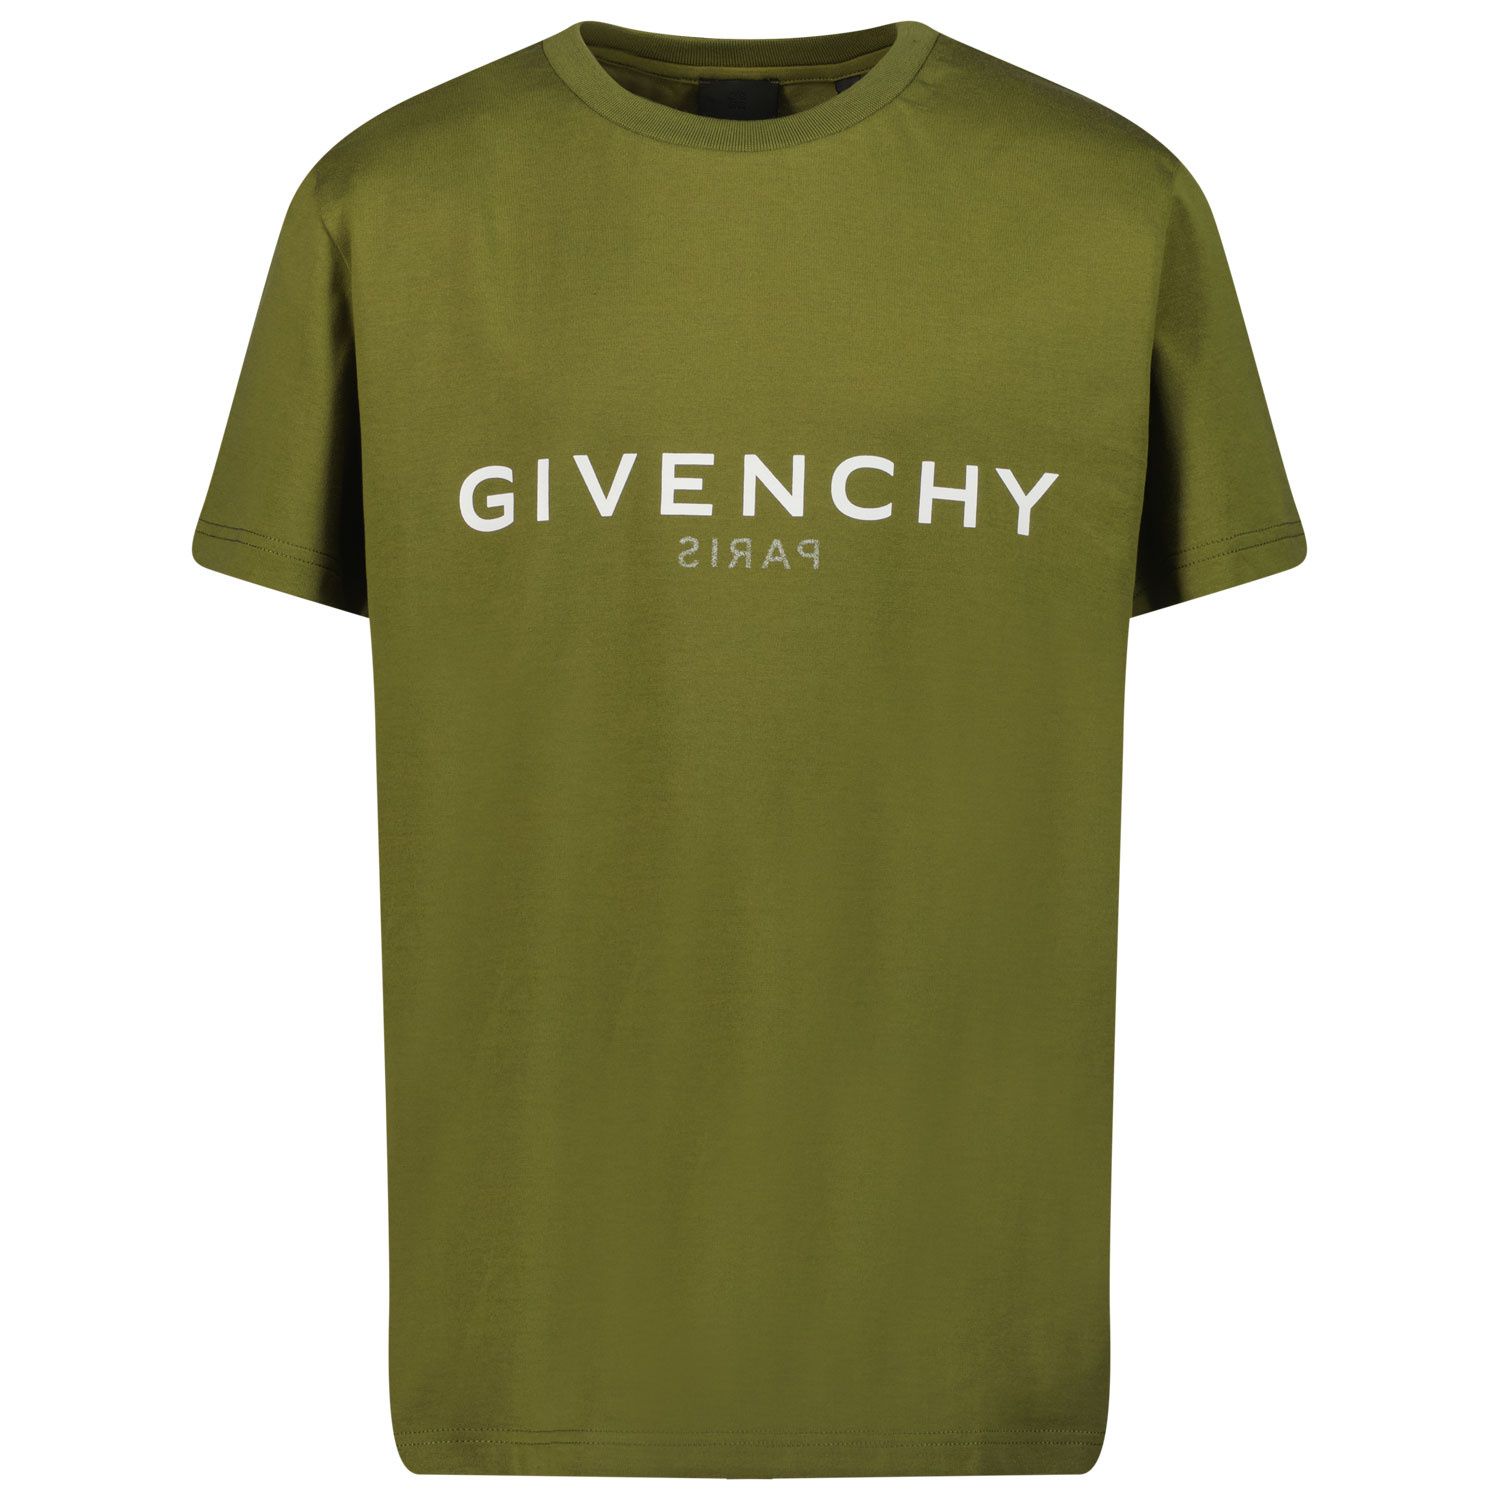 Afbeelding van Givenchy H25324 kinder t-shirt army